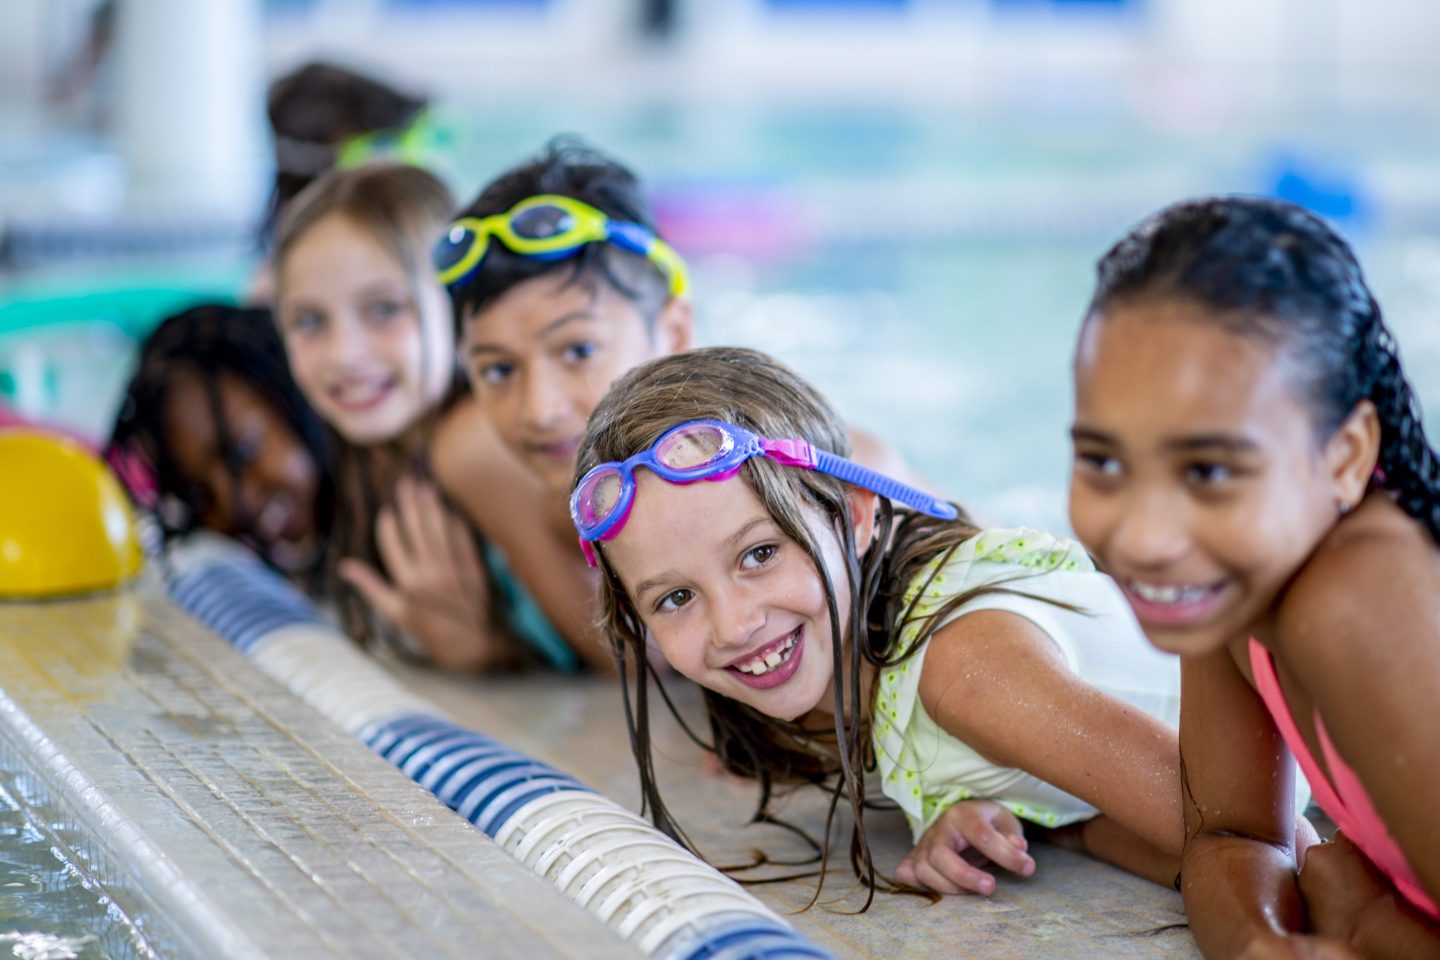 A multi-ethnic group of kids are indoors in a pool. Some of them are wearing goggles and smiling at the camera.